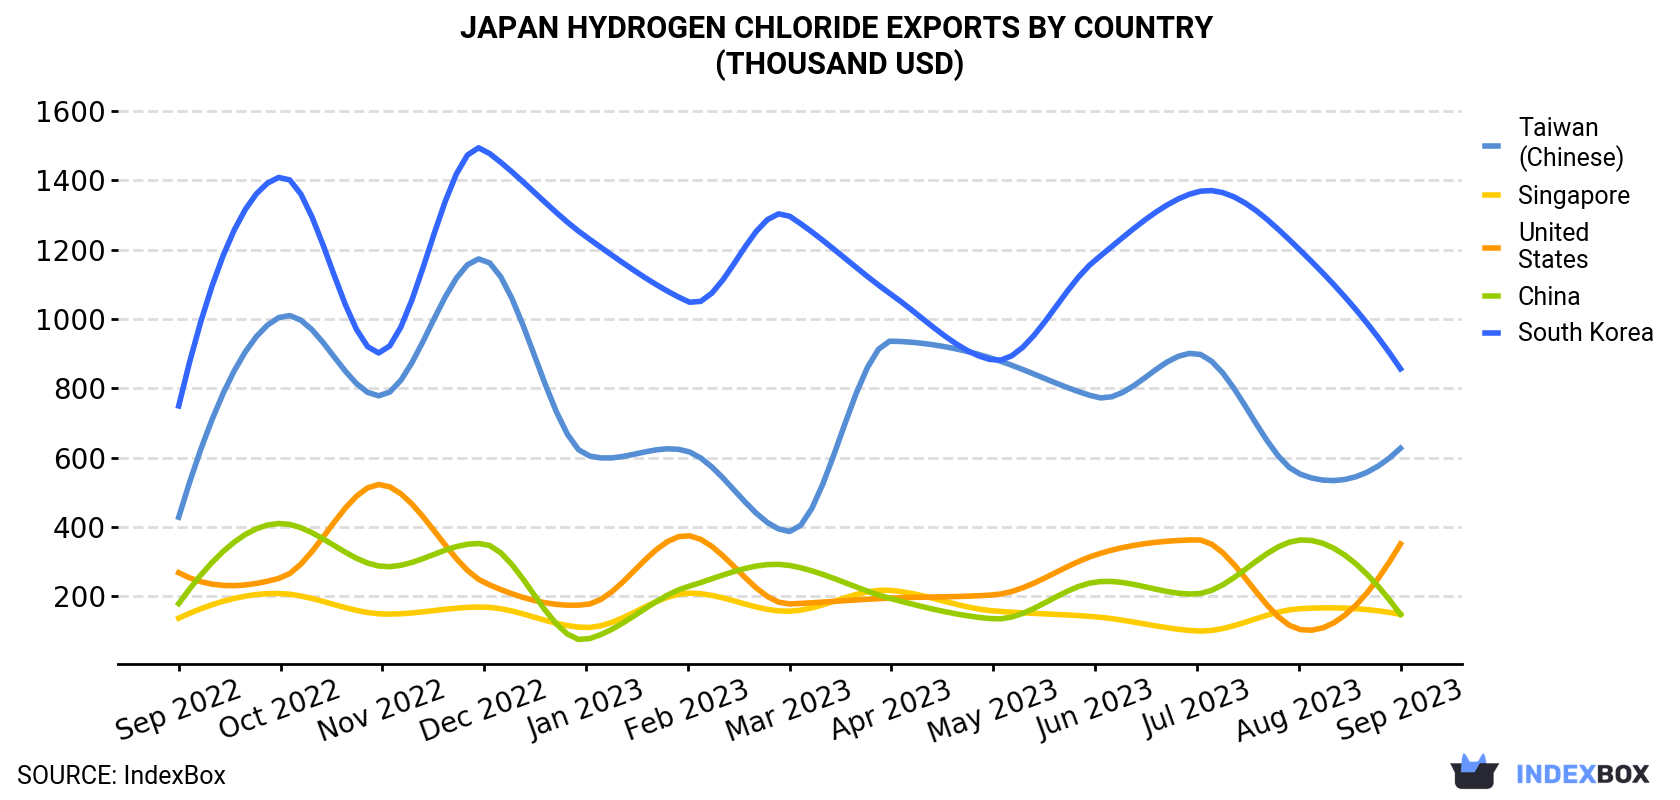 Japan Hydrogen Chloride Exports By Country (Thousand USD)